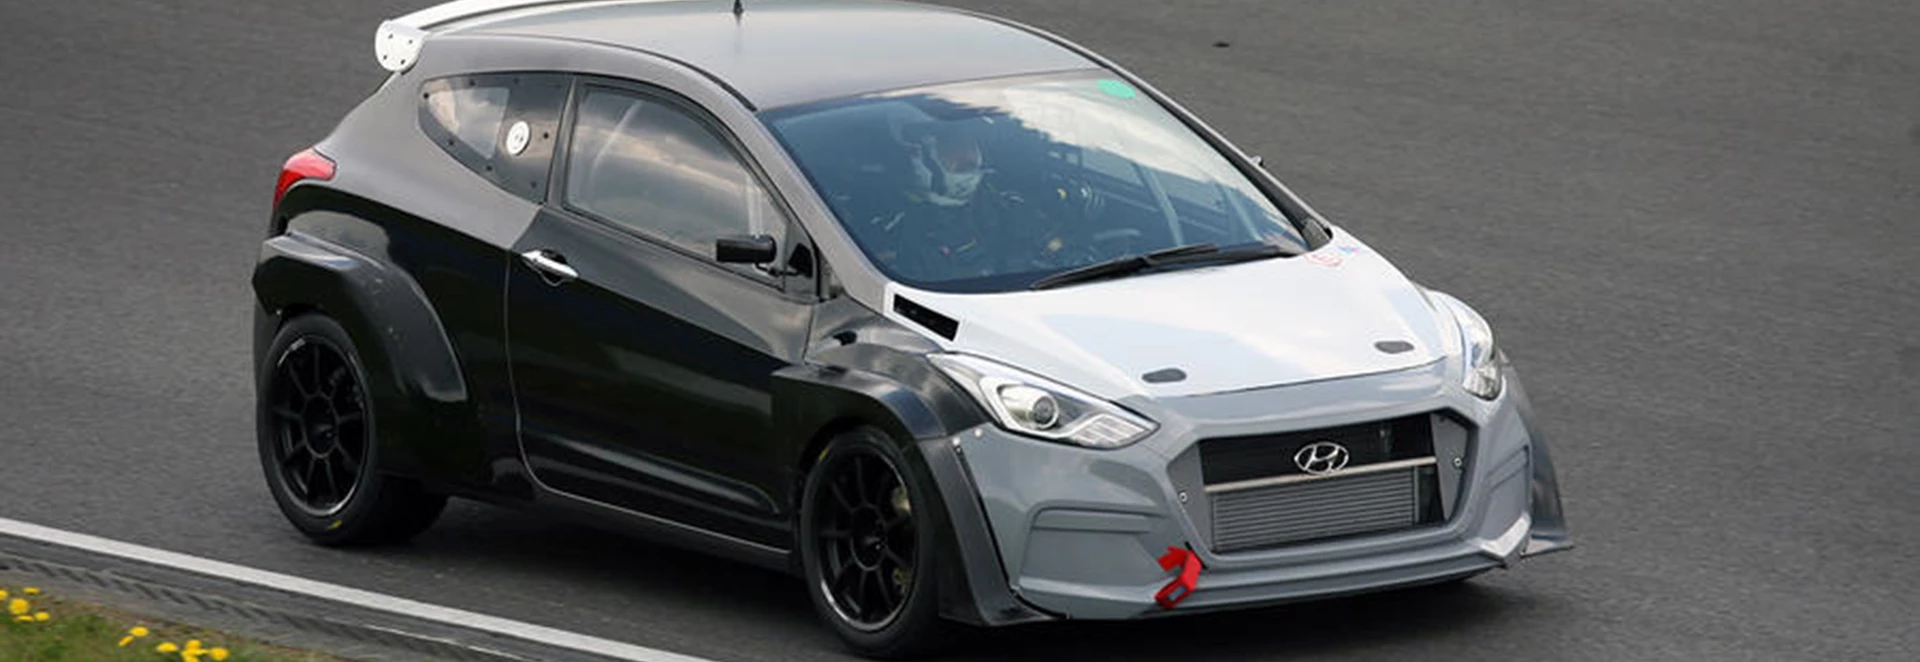 Here's your first look at the Hyundai i30 N performance car 